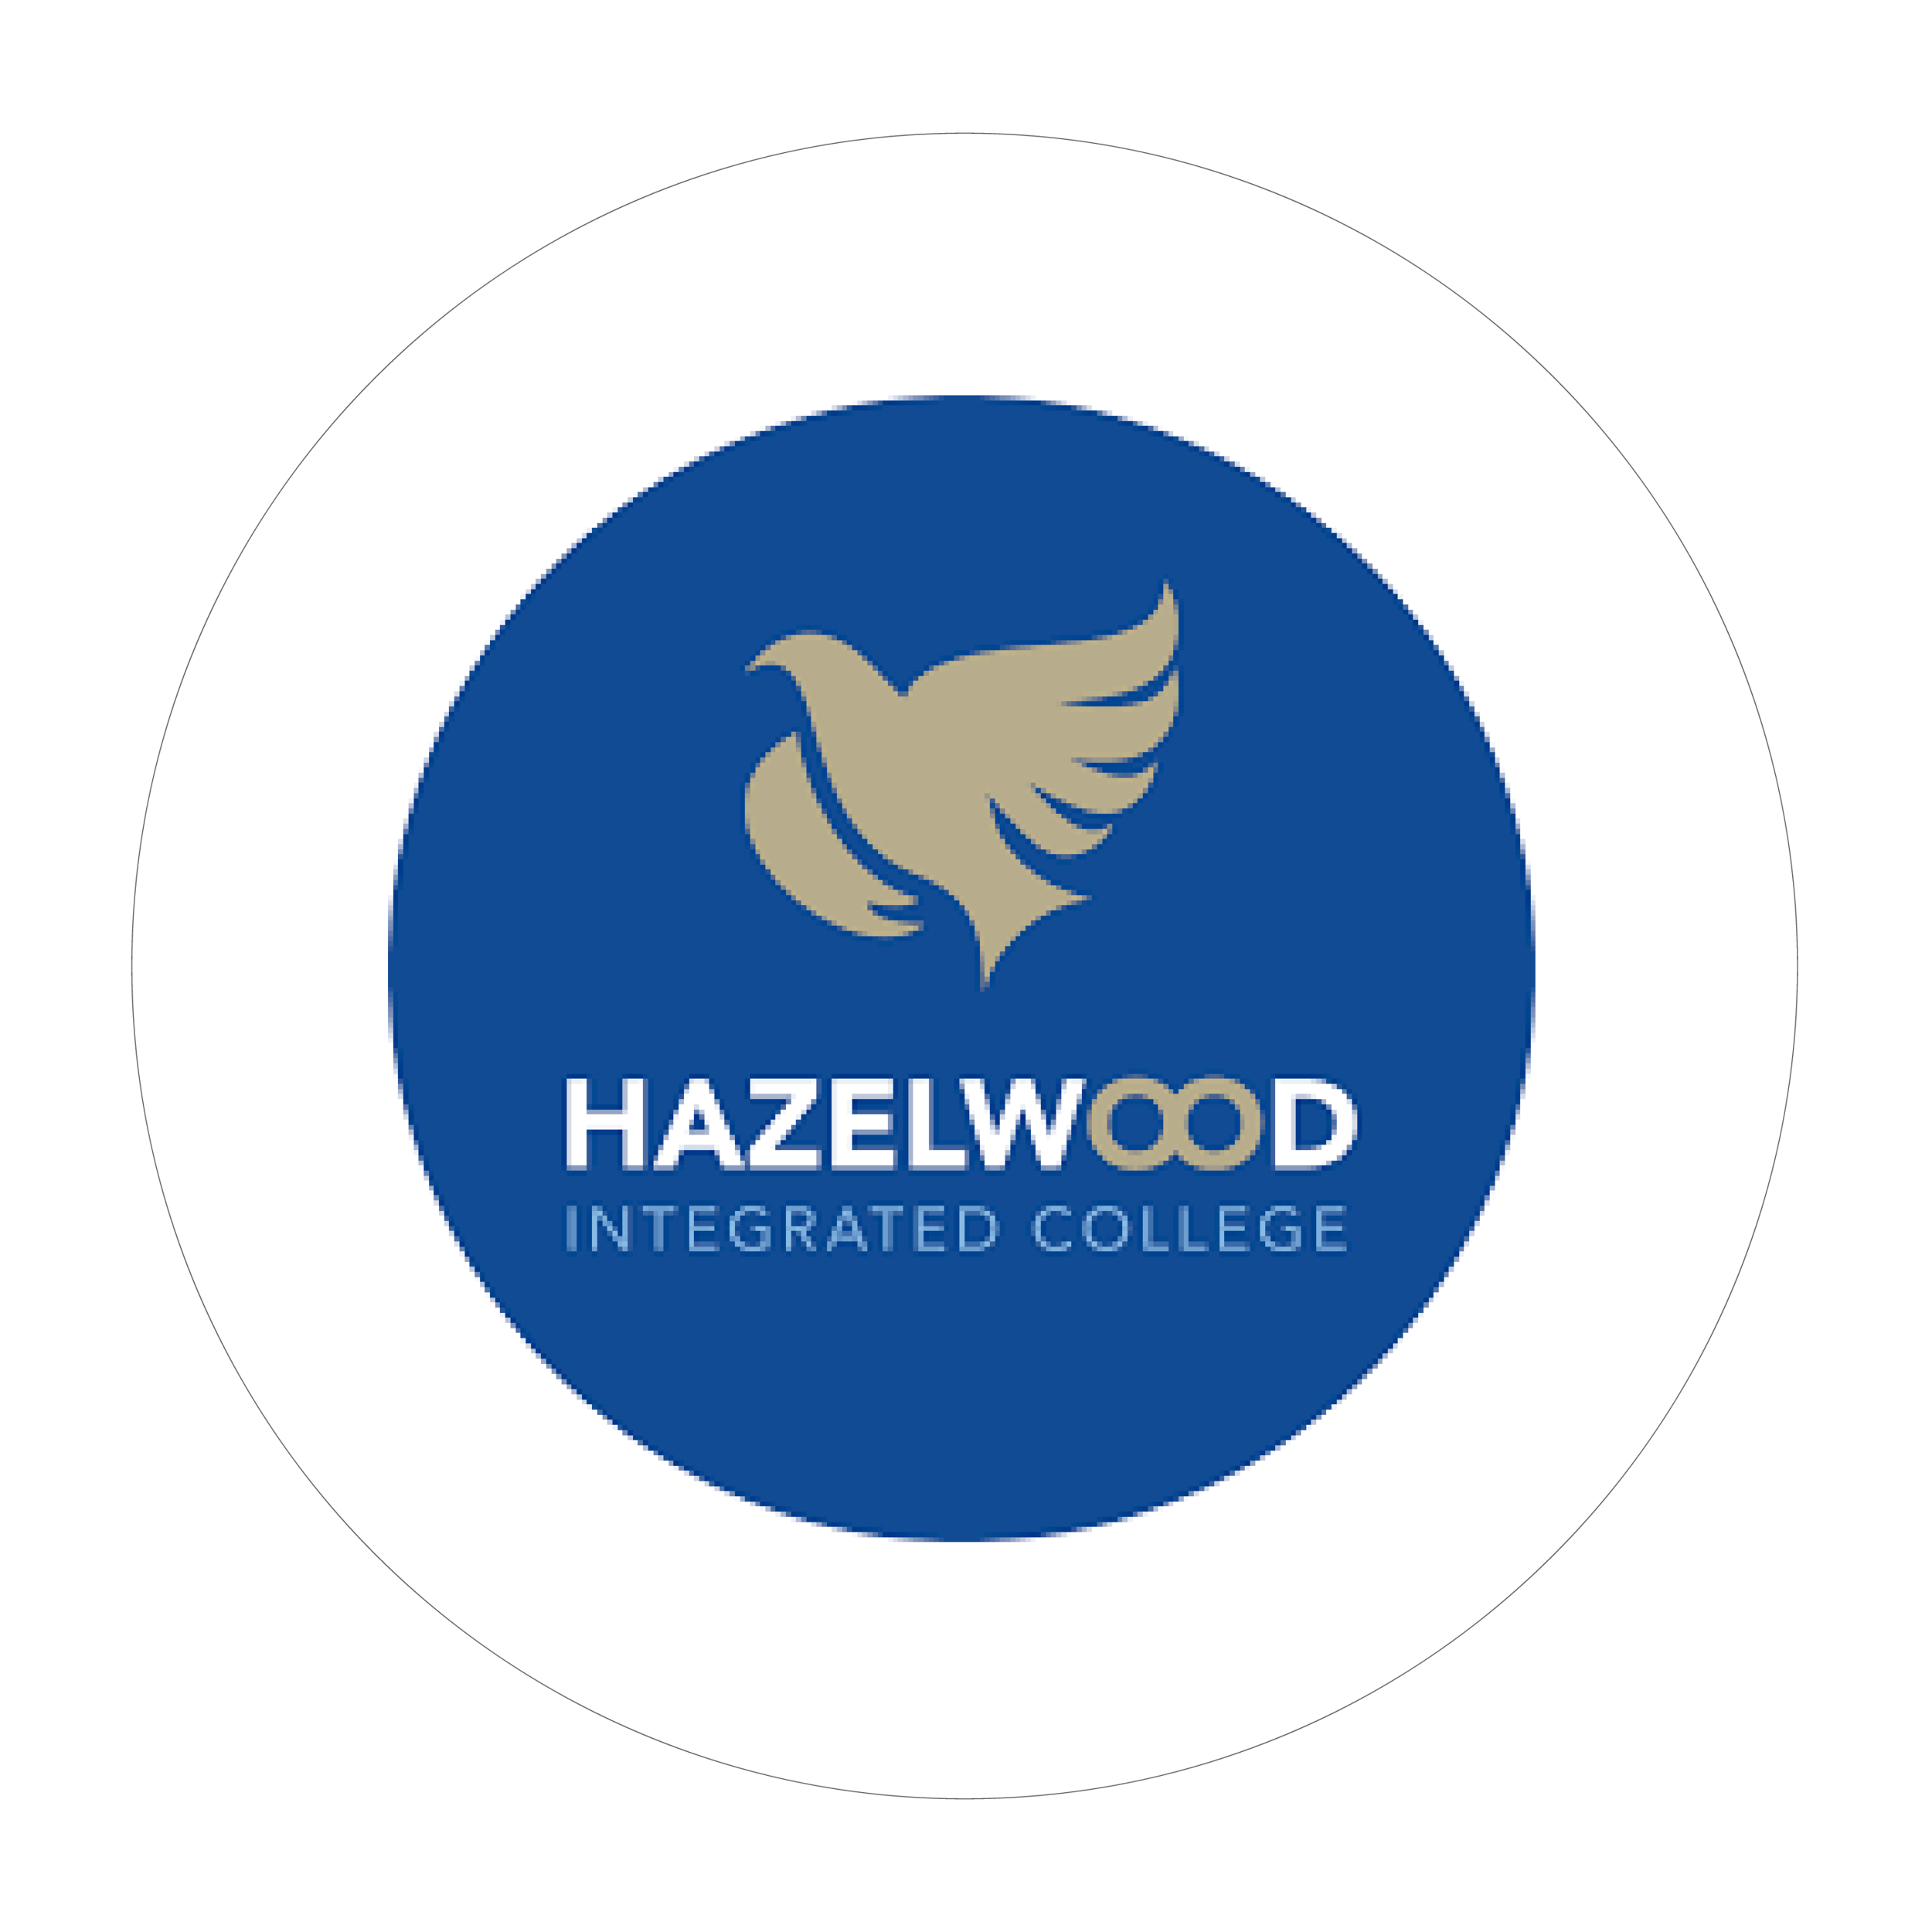 Hazelwood Integrated College